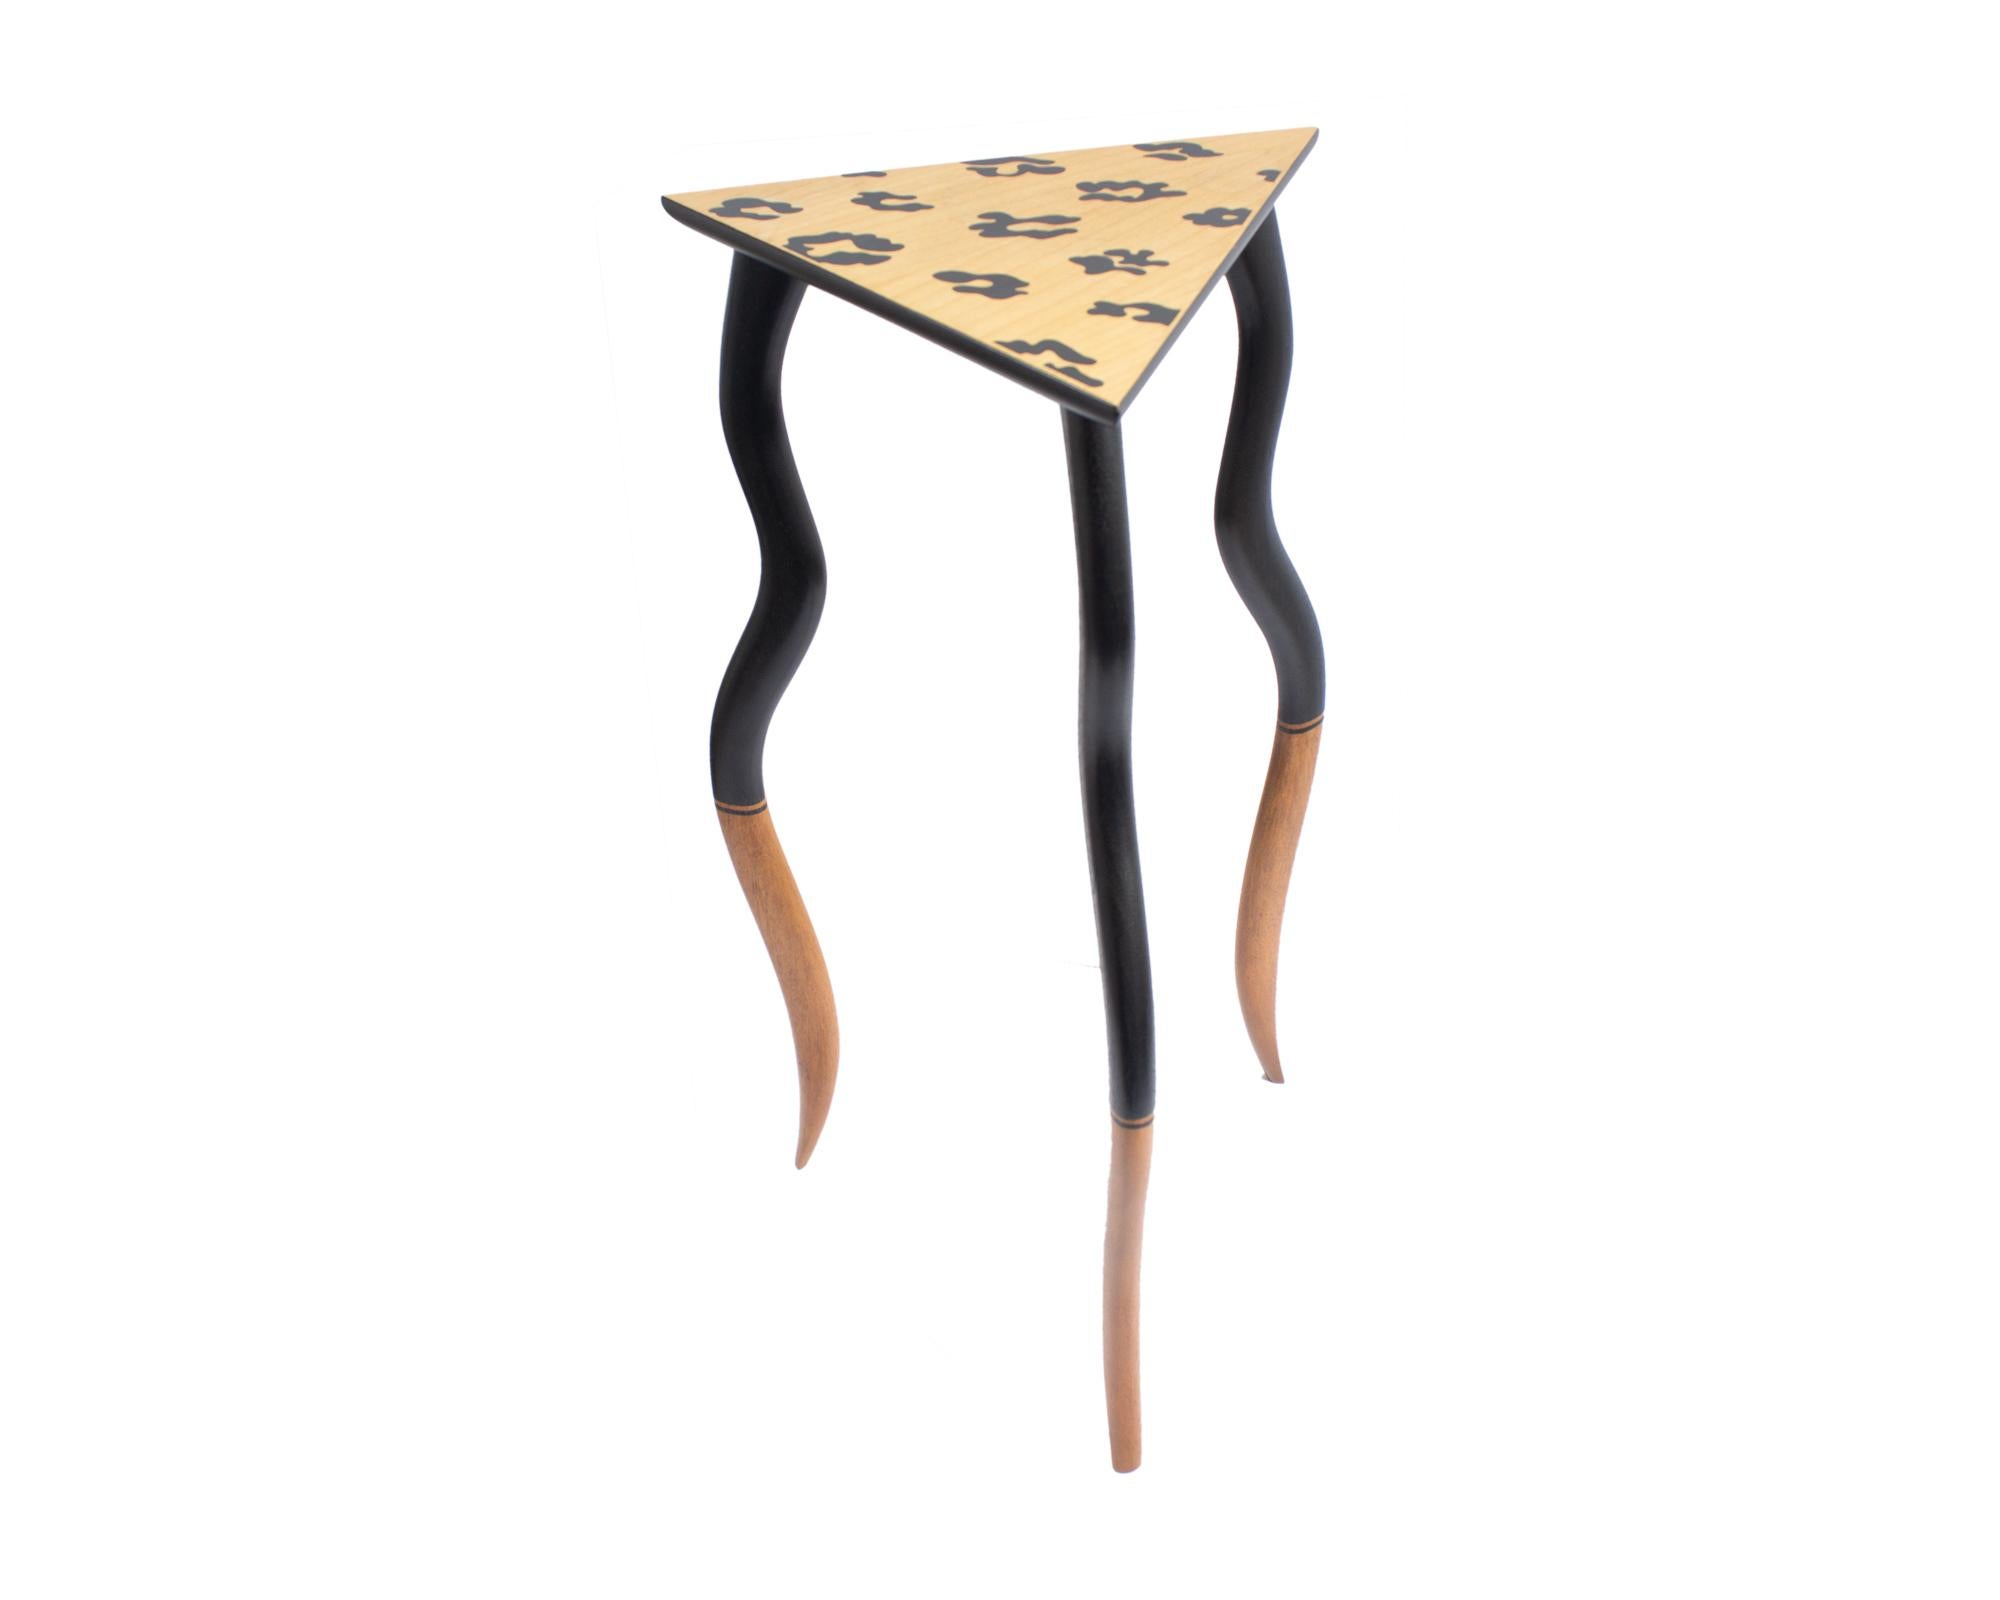 A 1980s or early 1990s Postmodern wooden table designed by American artist and designer Bob Trotman (born 1947). Titled Dancing Table, this wooden accent table has a triangular top and three wavy legs. The table has a leopard spot design to the top